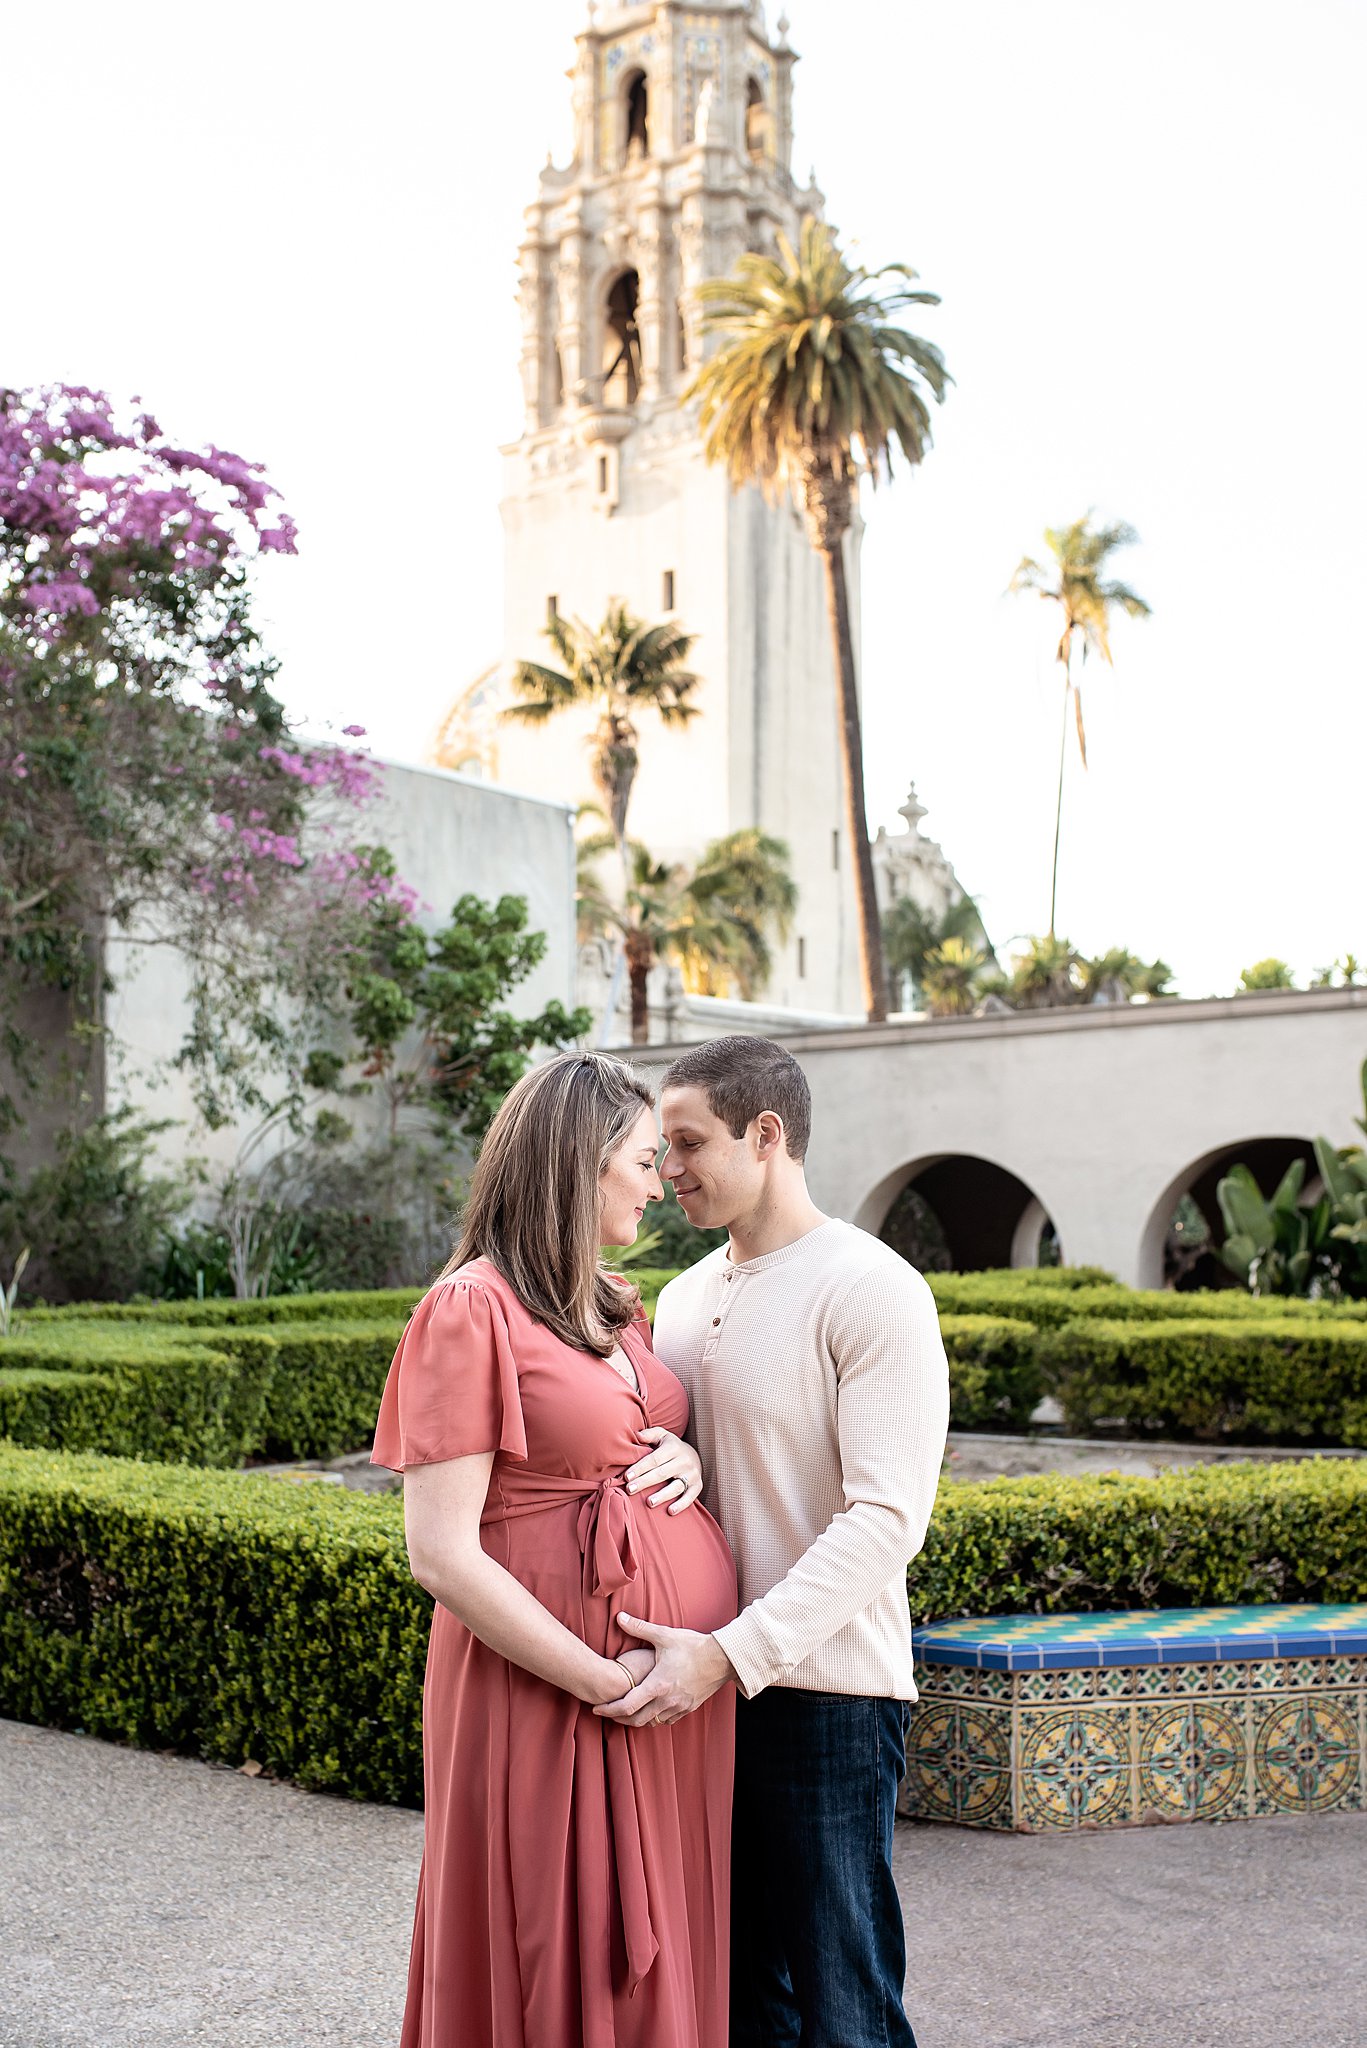 A mom to be in a pink maternity dress stands in a garden resting her forehead with her partners' san diego home birth